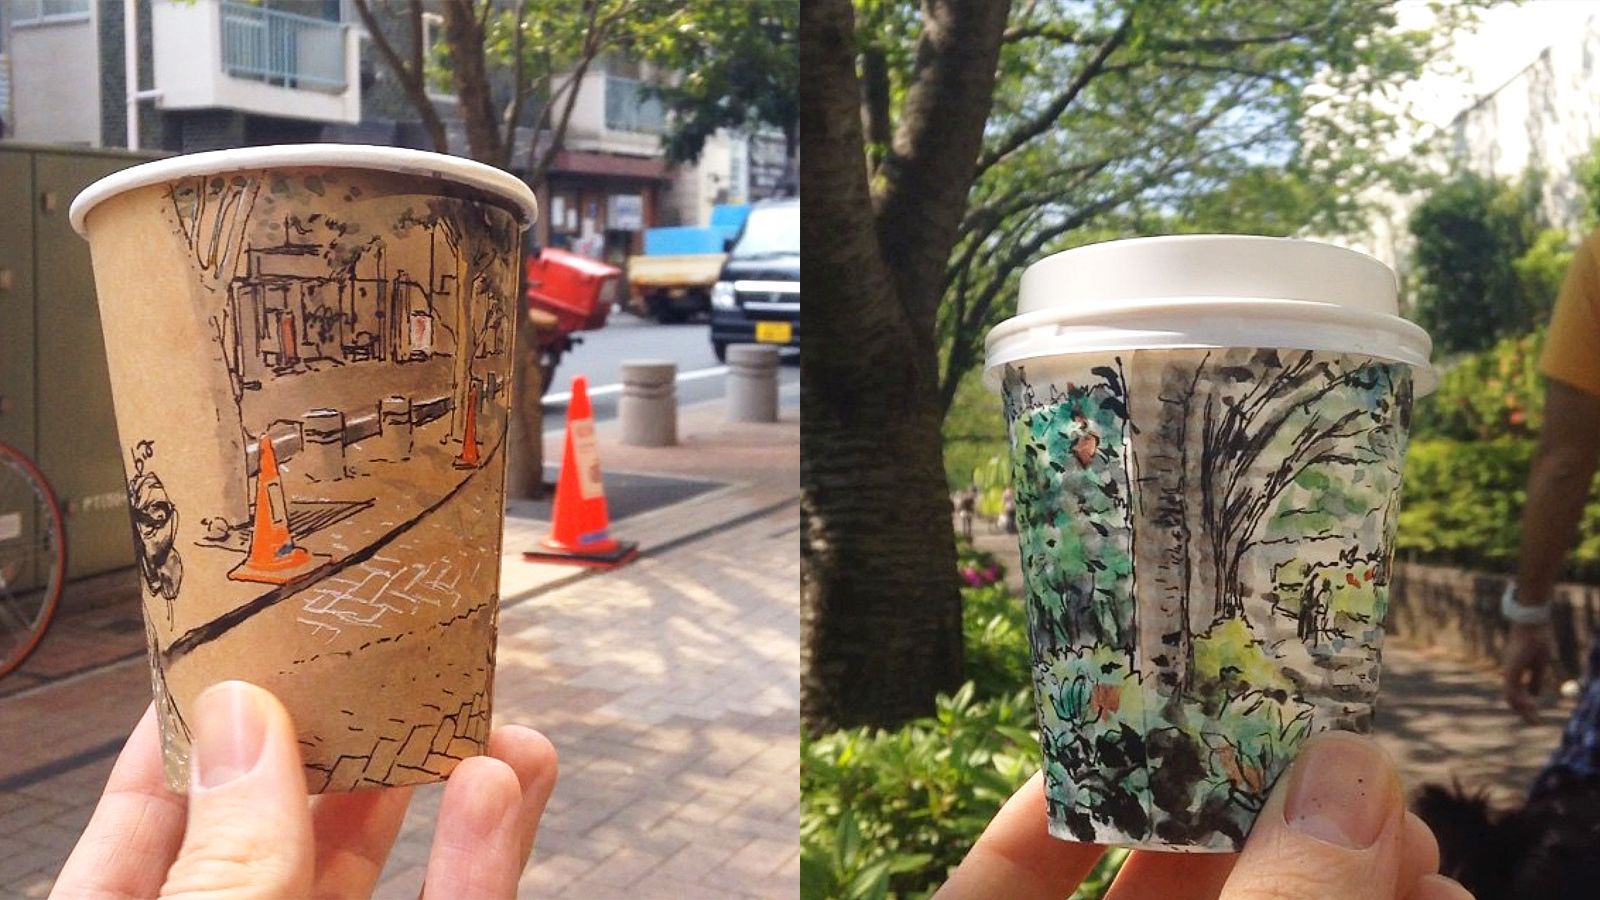 How Disposable Coffee Cup Design Became High Art - Eater